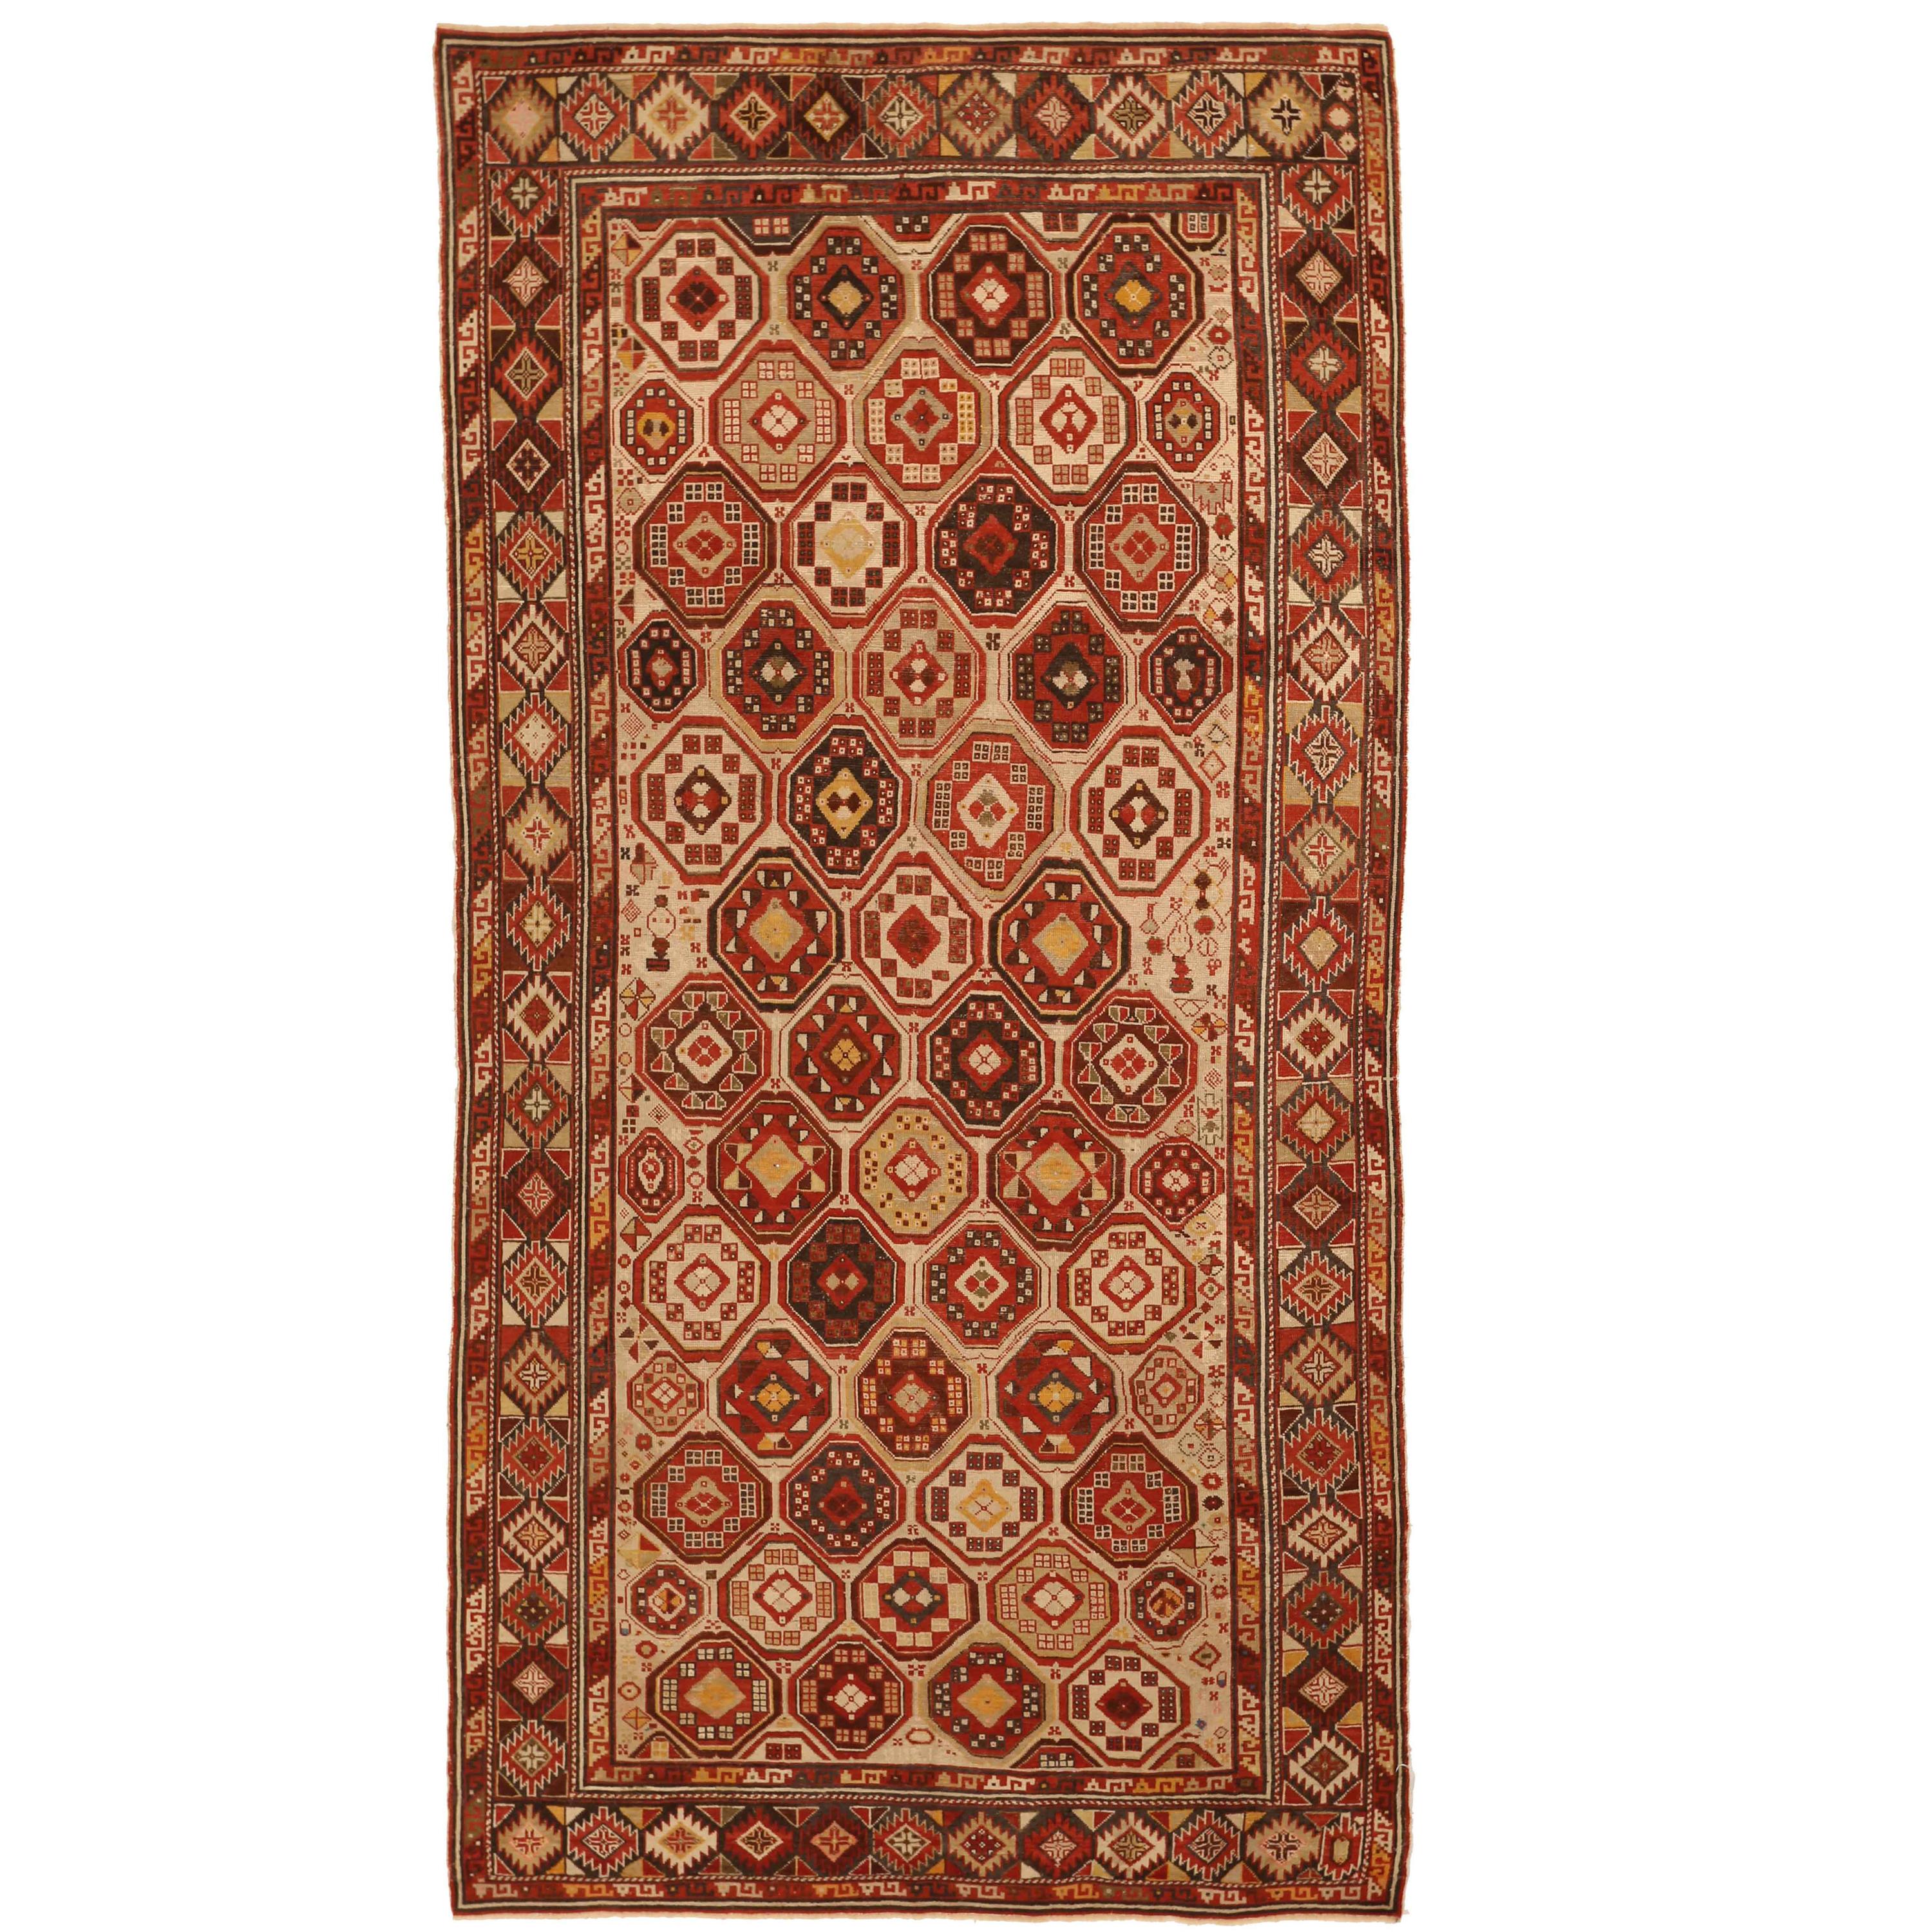 Antique Russian Rug Shirvan Style with Intricate Geometric Patterns, circa 1900s For Sale